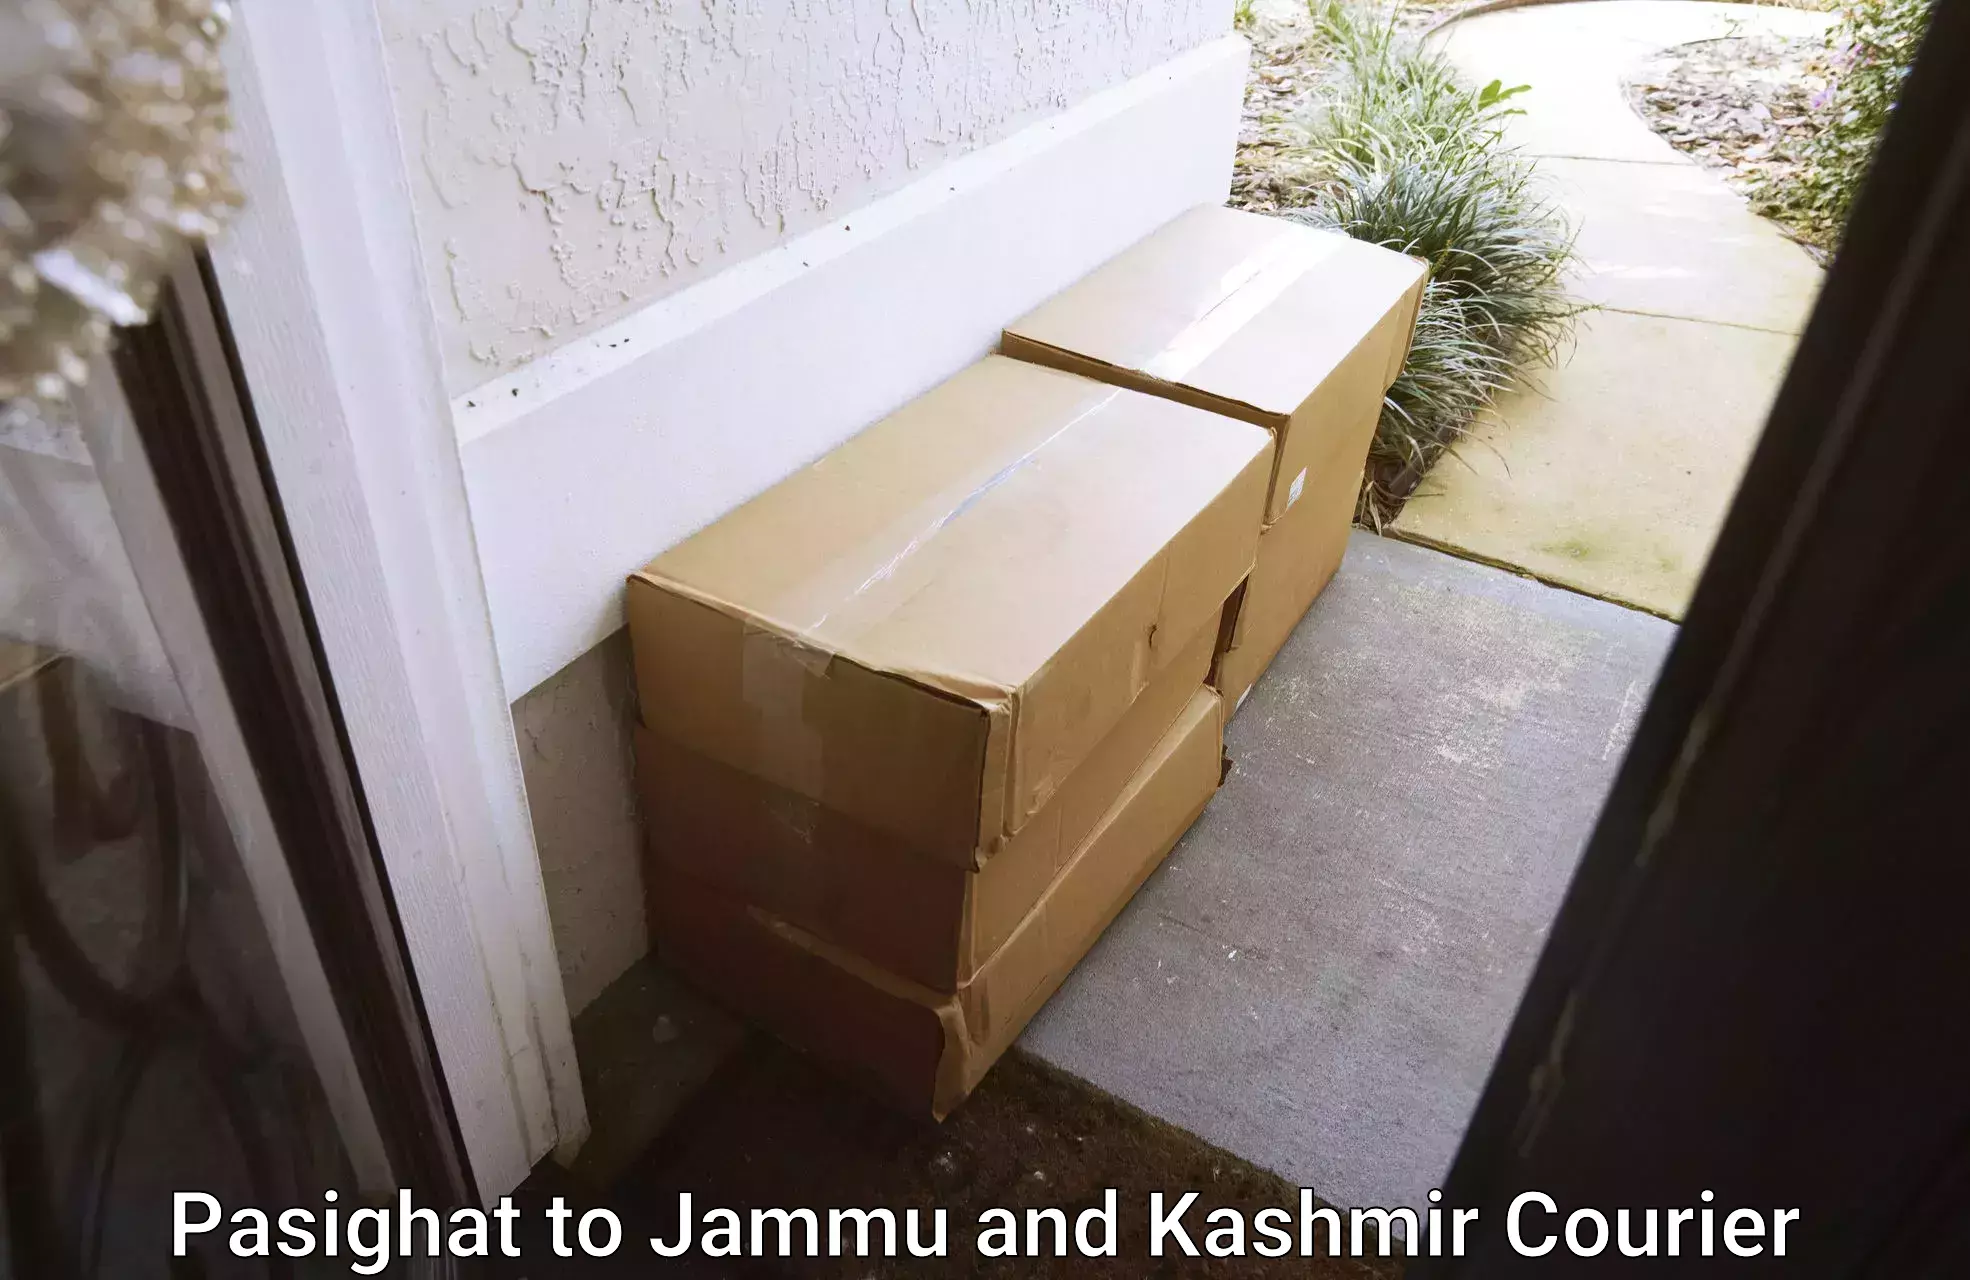 Courier service innovation Pasighat to Jammu and Kashmir